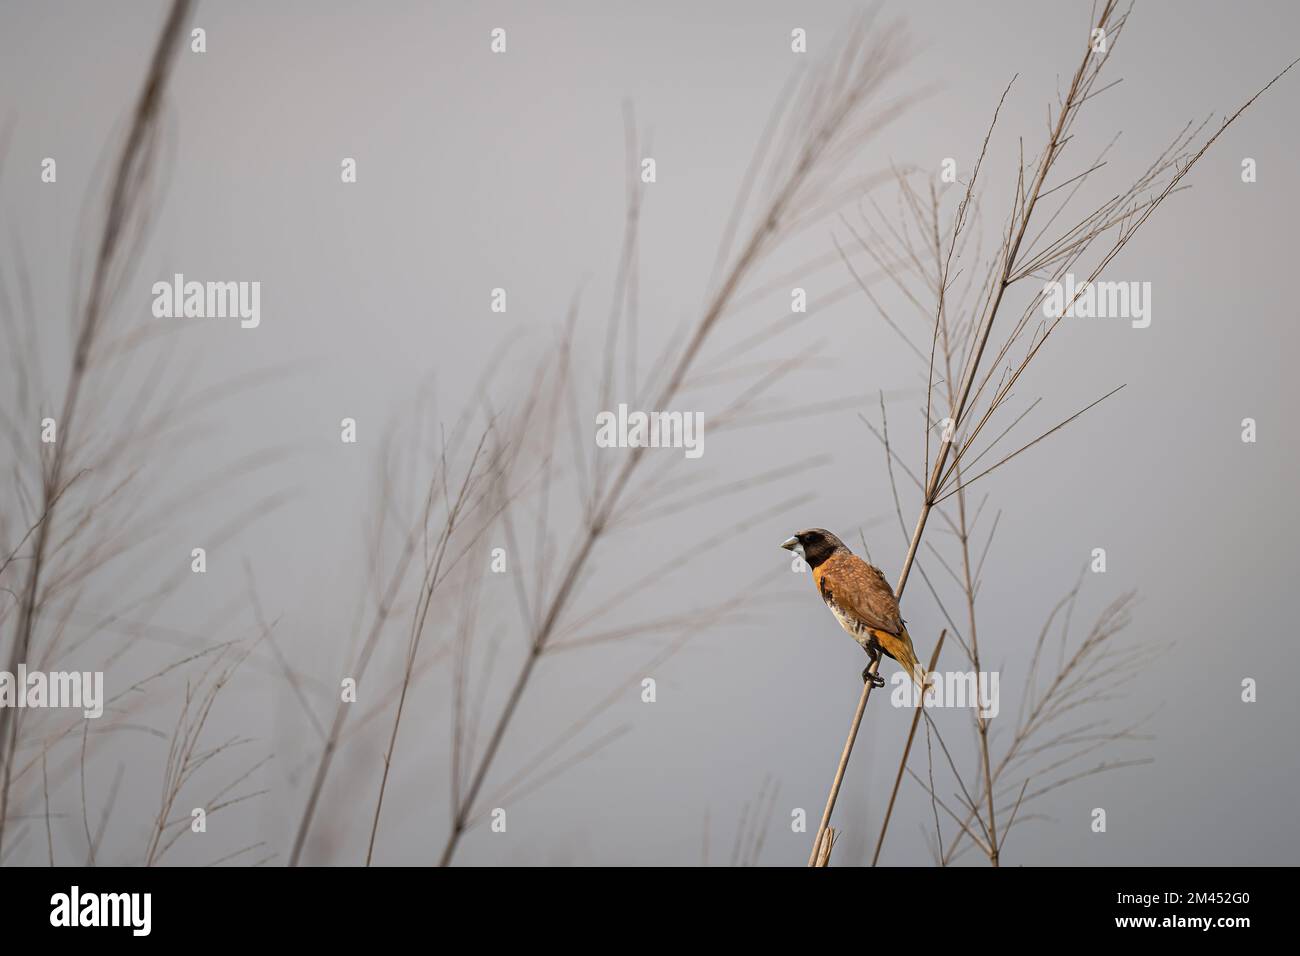 A single Chestnut-breasted Mannikin perched on a grass seed-head in an open field at Cattana Wetlands nature reserve in Cairns, QLD in Australia. Stock Photo